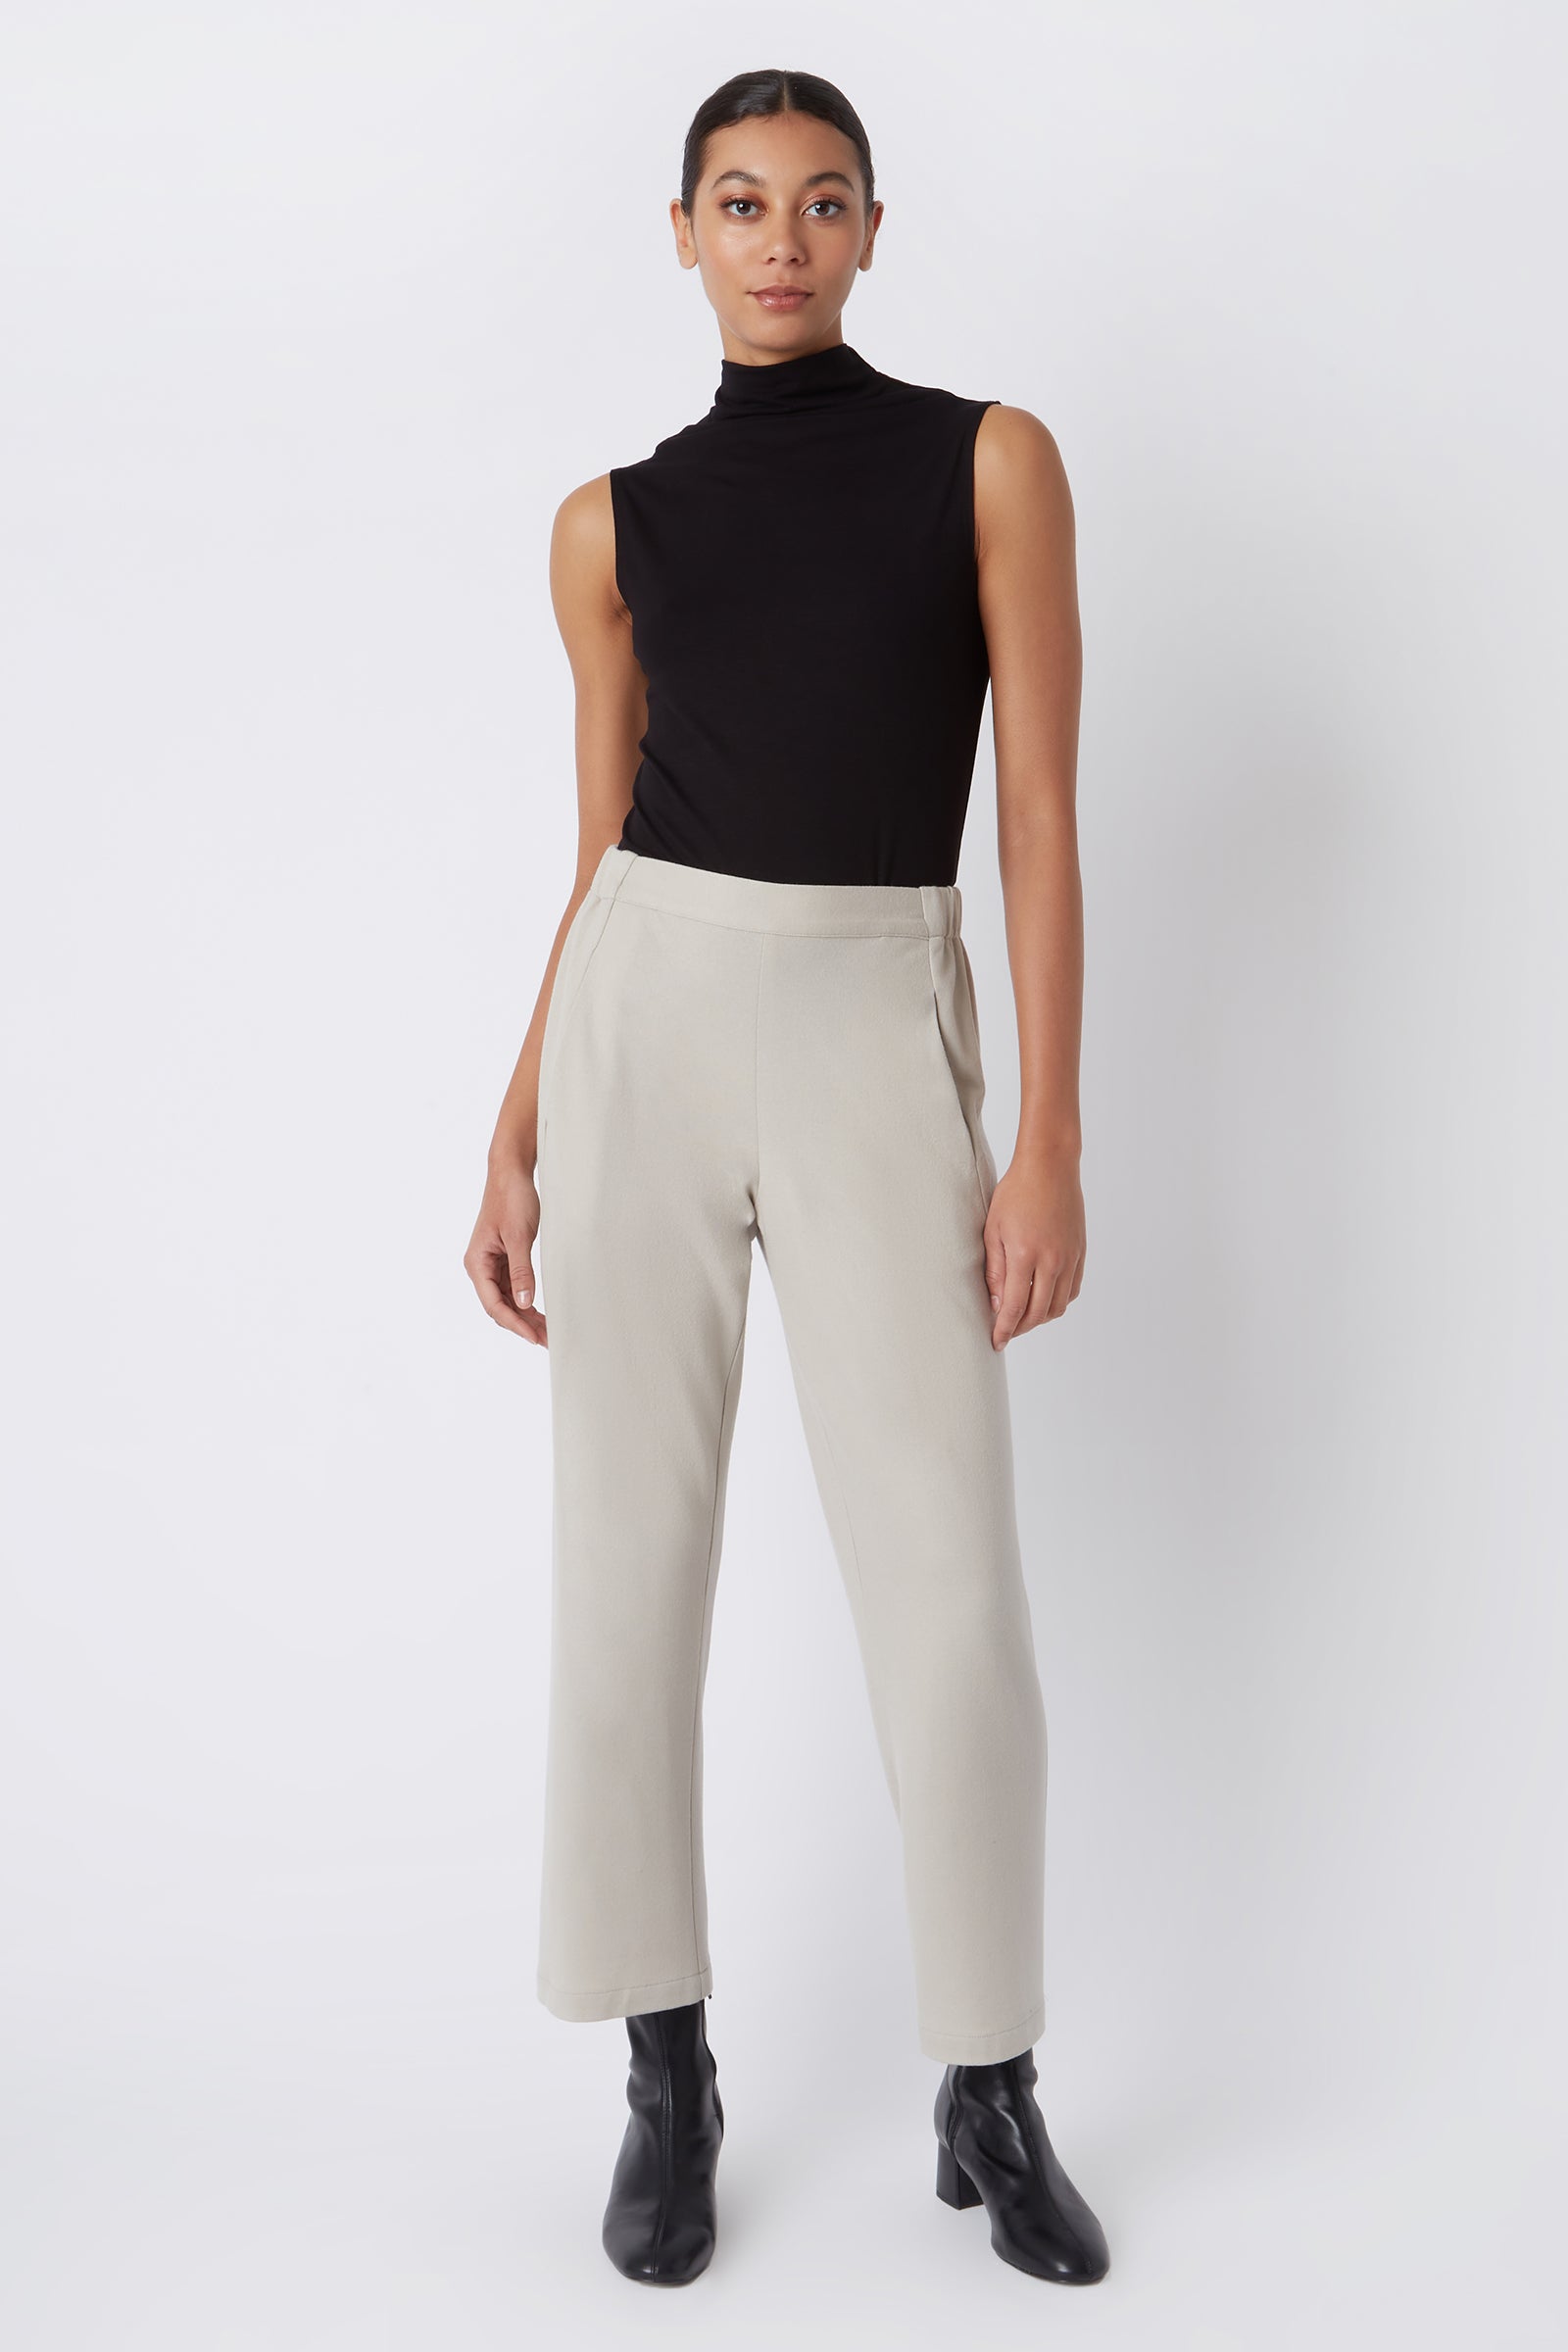 BuyNewTrend Skinny Fit Women Black Trousers - Buy BuyNewTrend Skinny Fit  Women Black Trousers Online at Best Prices in India | Flipkart.com